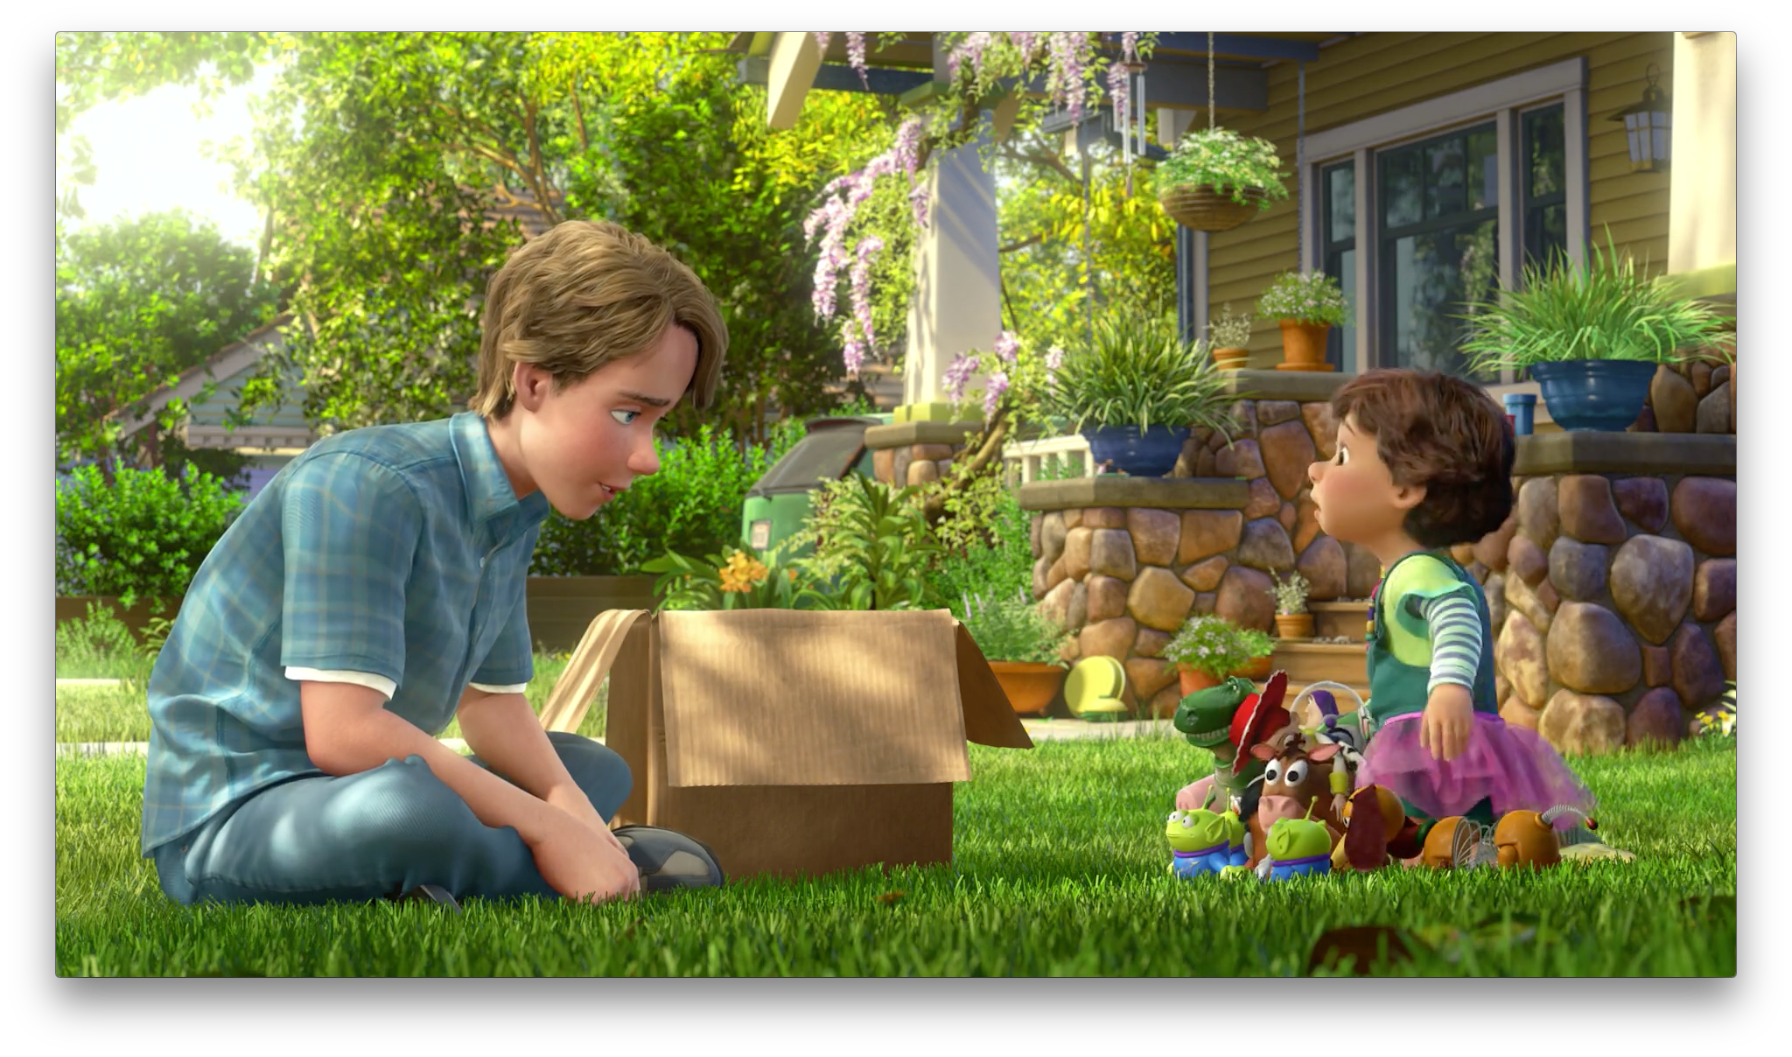 Toy Story 3 actor didn't know Andy gives toys away at the end